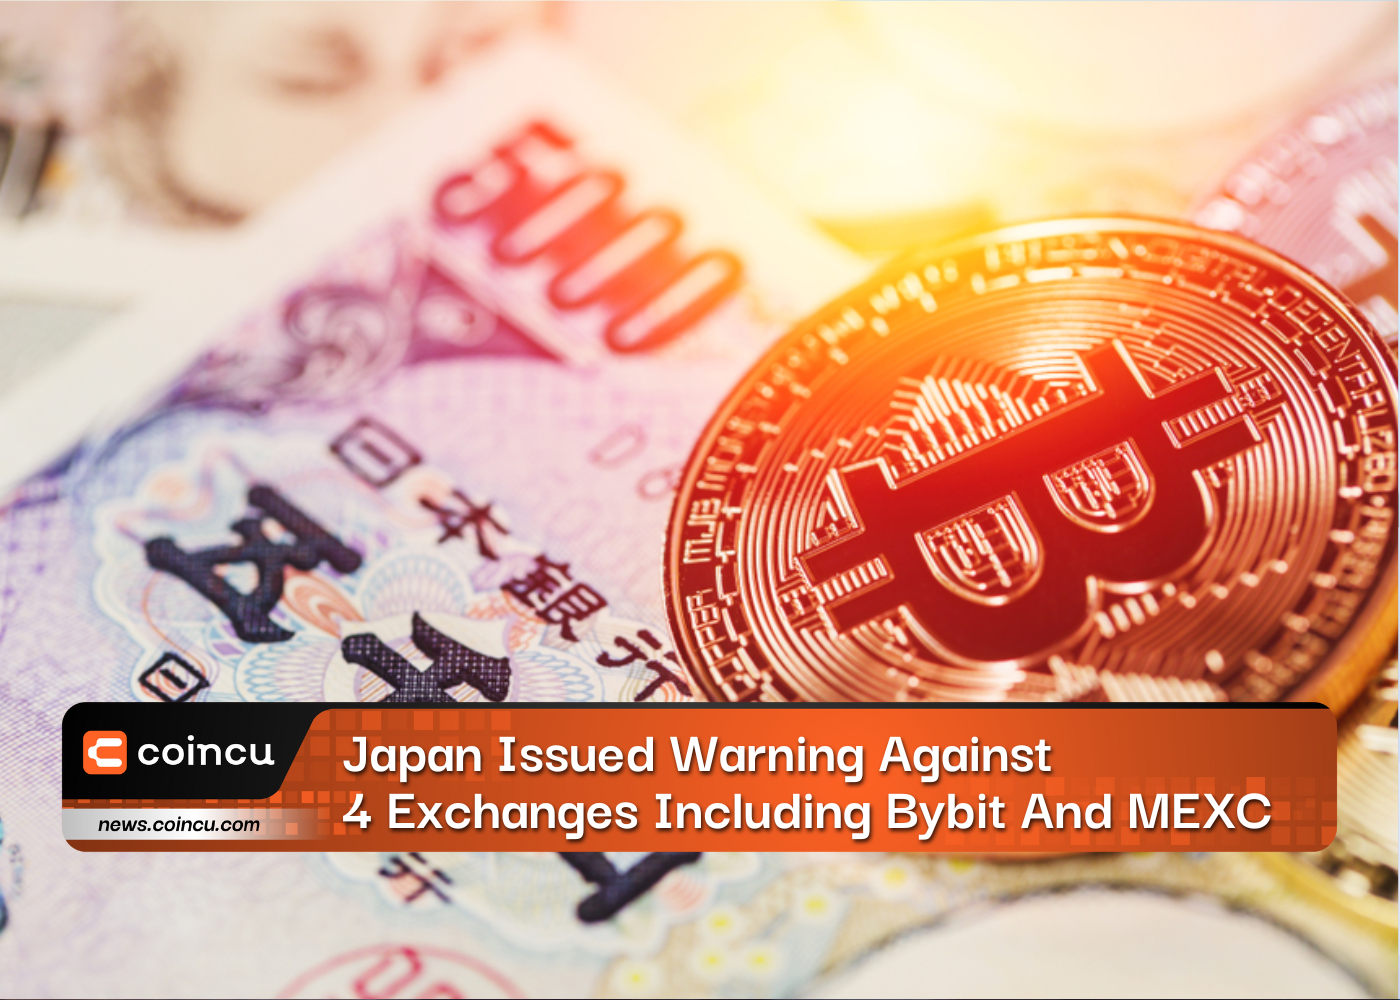 Japan Issued Warning Against 4 Exchanges Including Bybit And MEXC